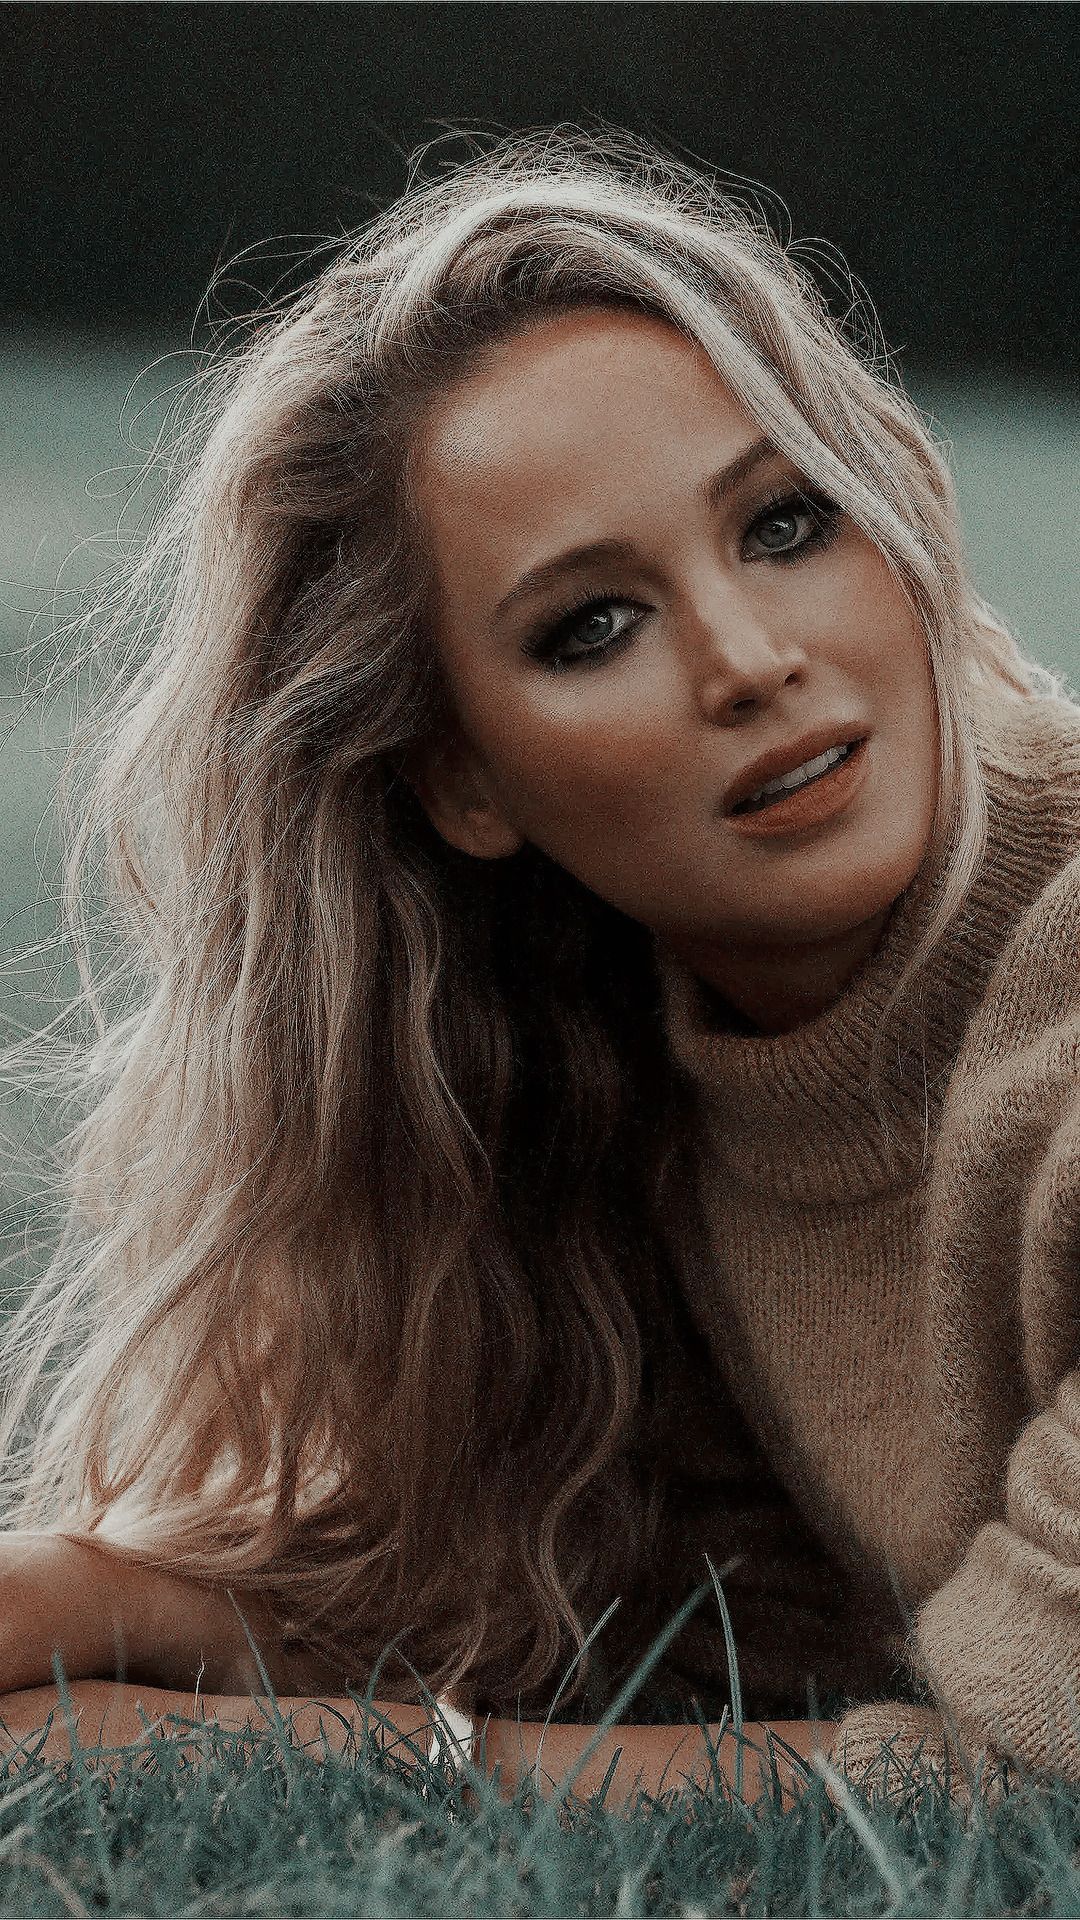 Jennifer Lawrence iPhone Wallpaper with high-resolution 1080x1920 pixel. You can use this wallpaper for your iPhone 5, 6, 7, 8, X, XS, XR backgrounds, Mobile Screensaver, or iPad Lock Screen - Jennifer Lawrence